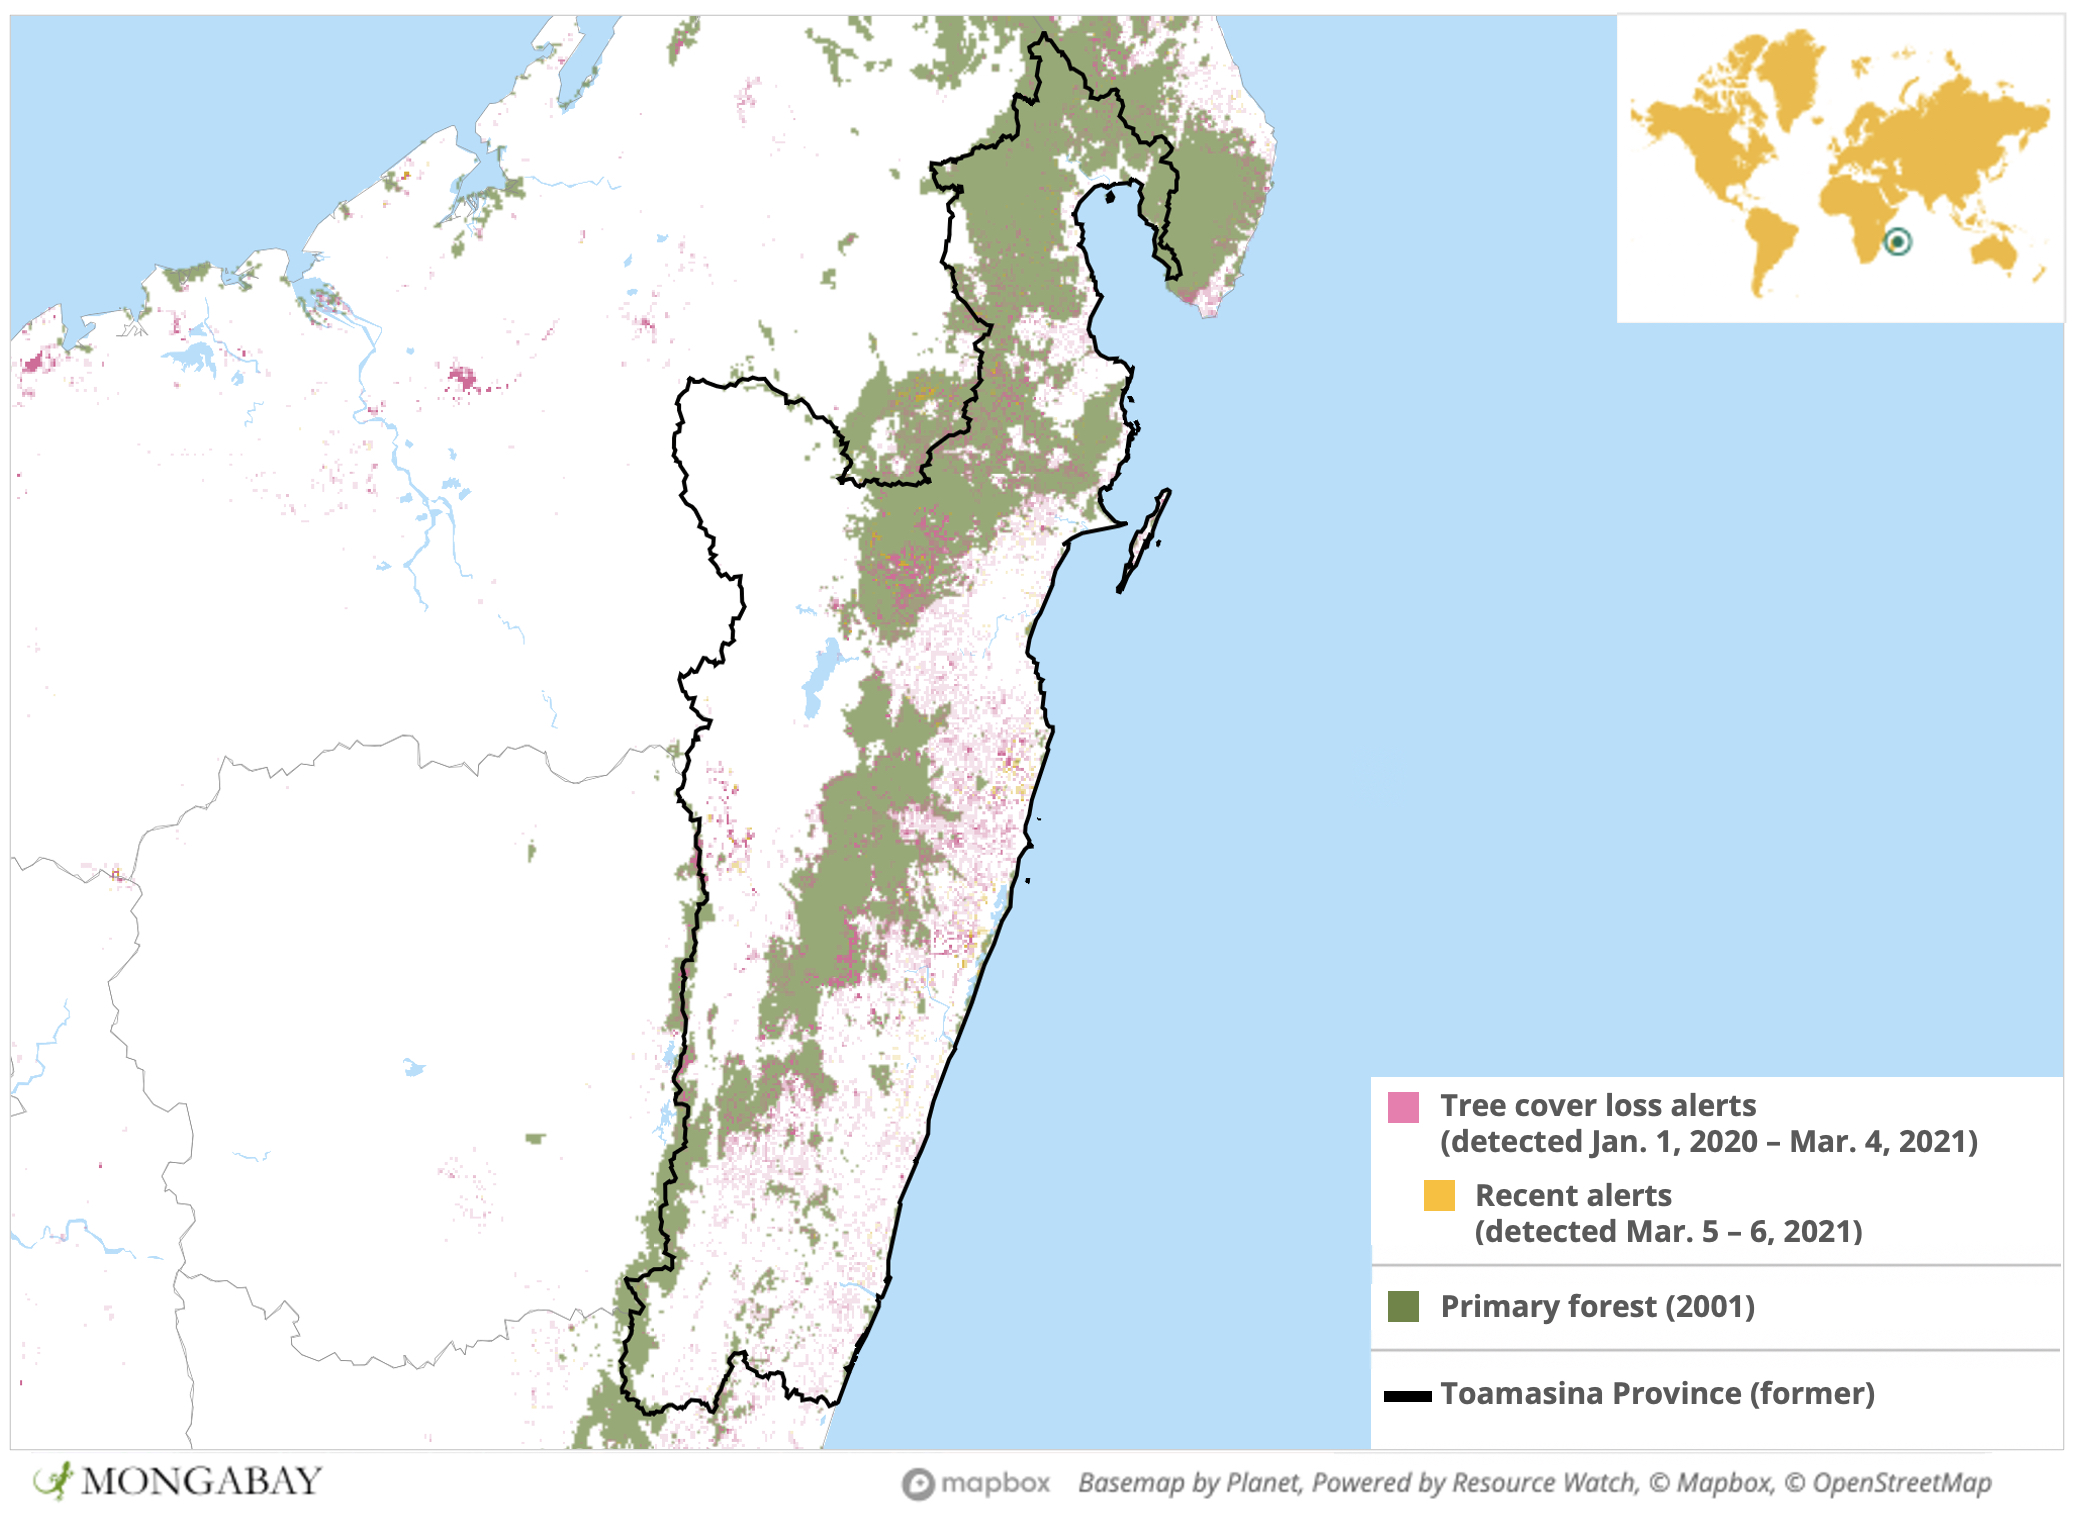 Satellite data show the area comprising the former province of Toamasina experienced a surge in deforestation in 2020.